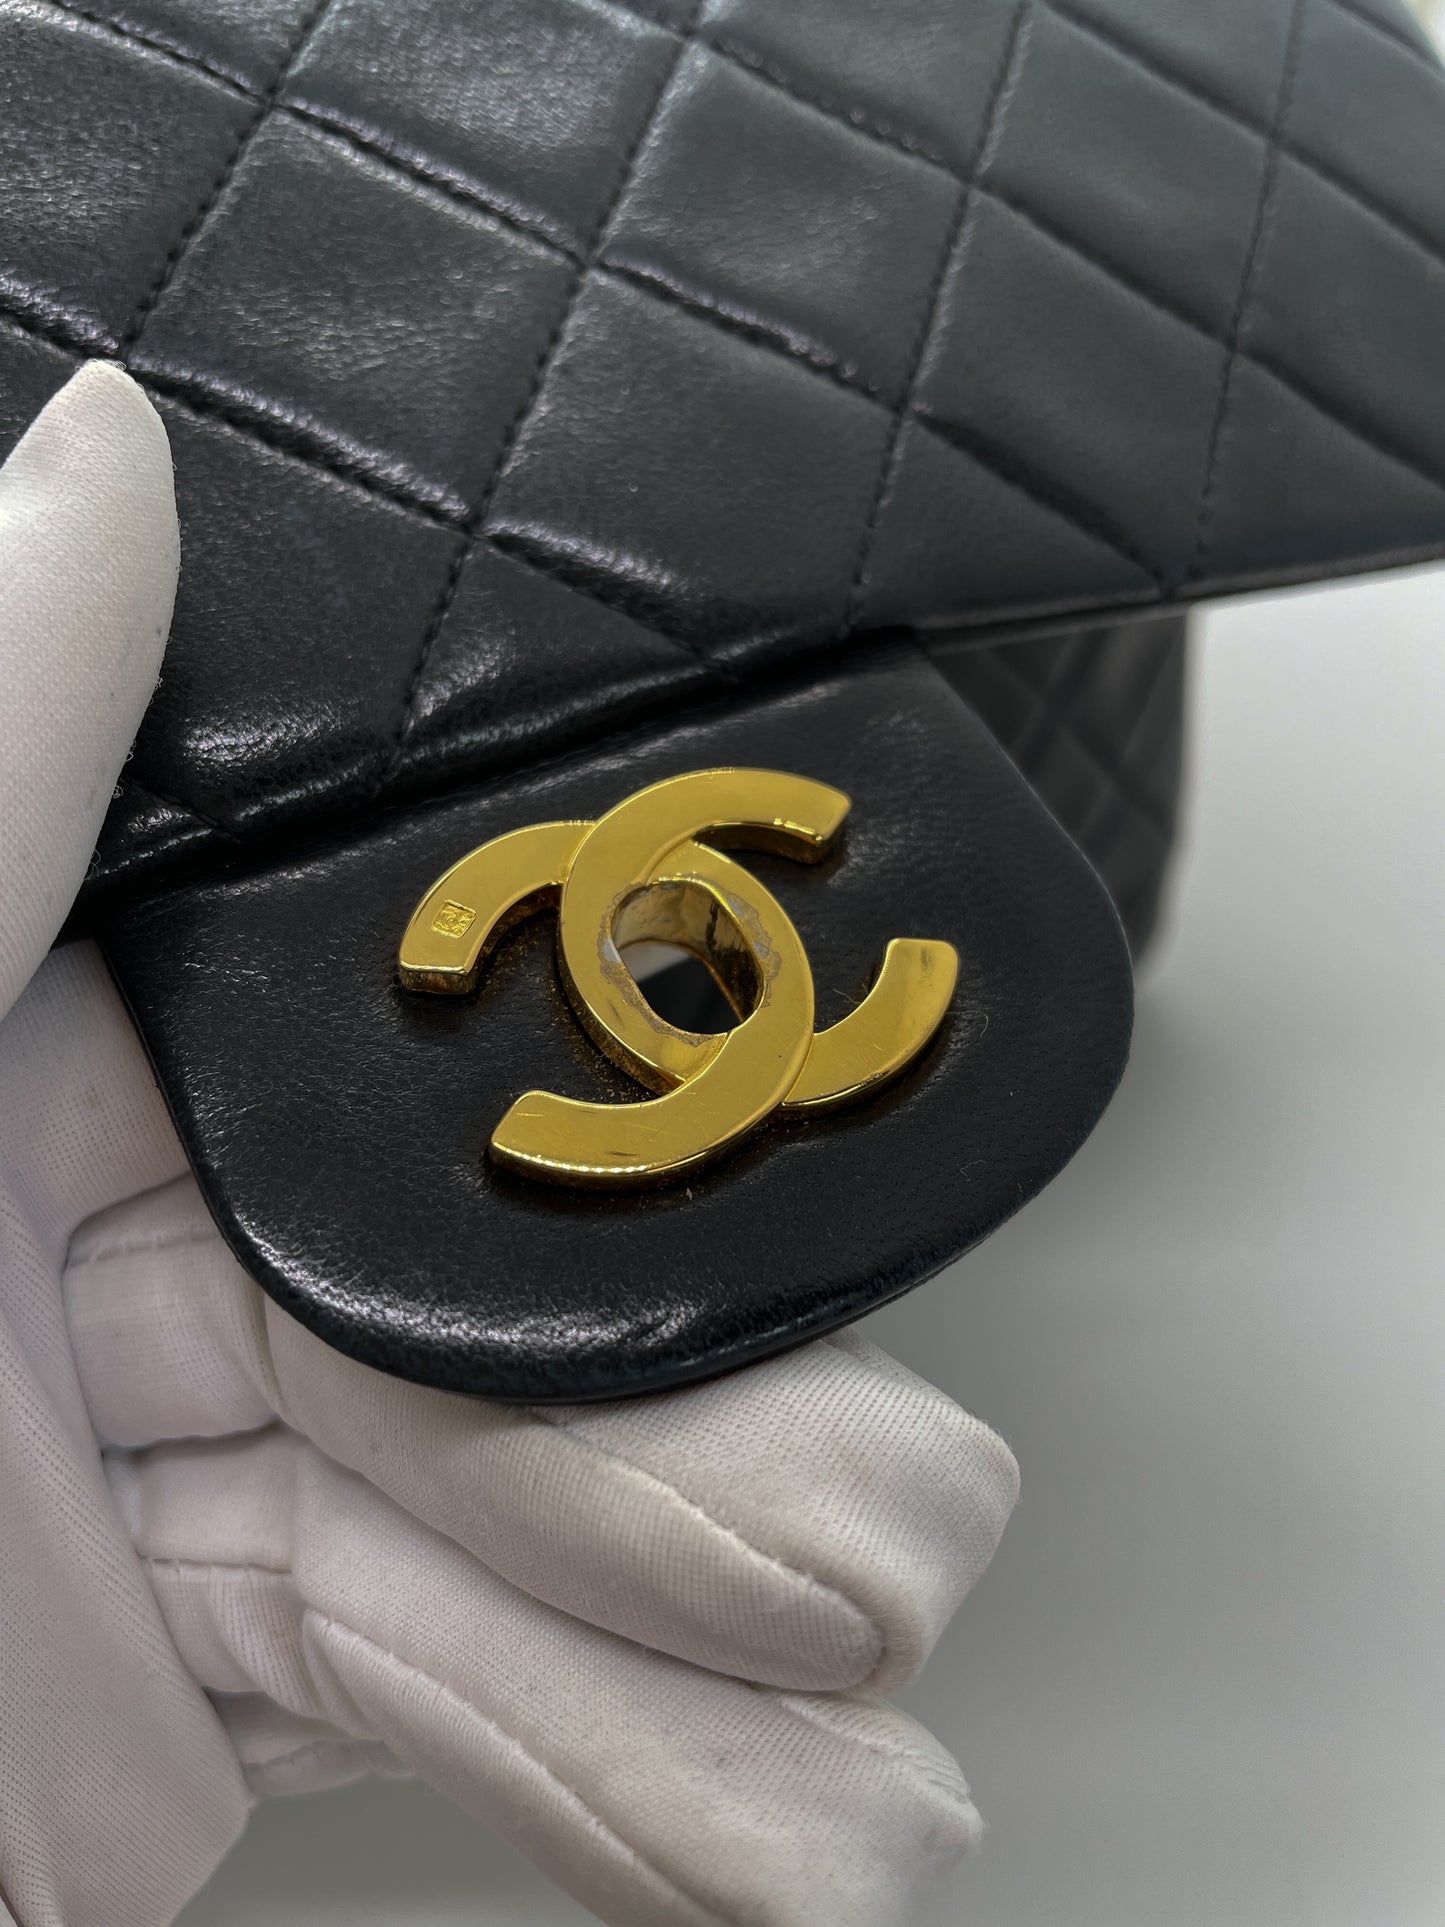 CHANEL VINRAGE SMALL CLASSIC FLAP